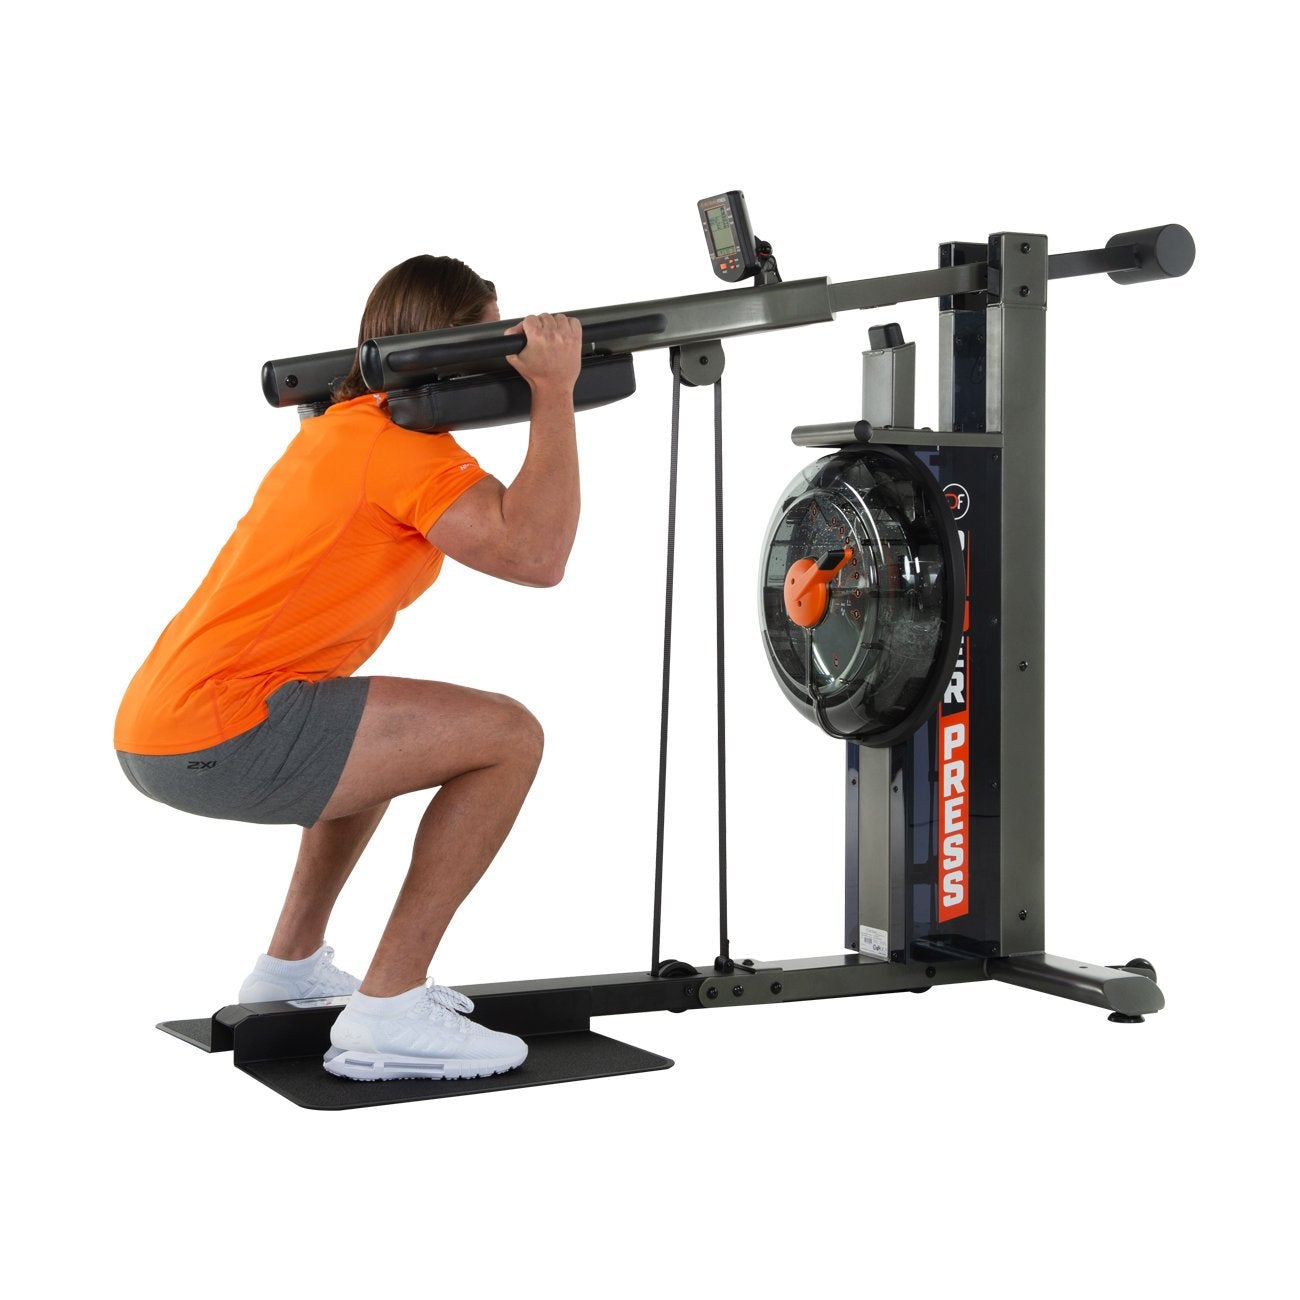 Squat exercise on the First Degree Fitness Fluid Power Press.